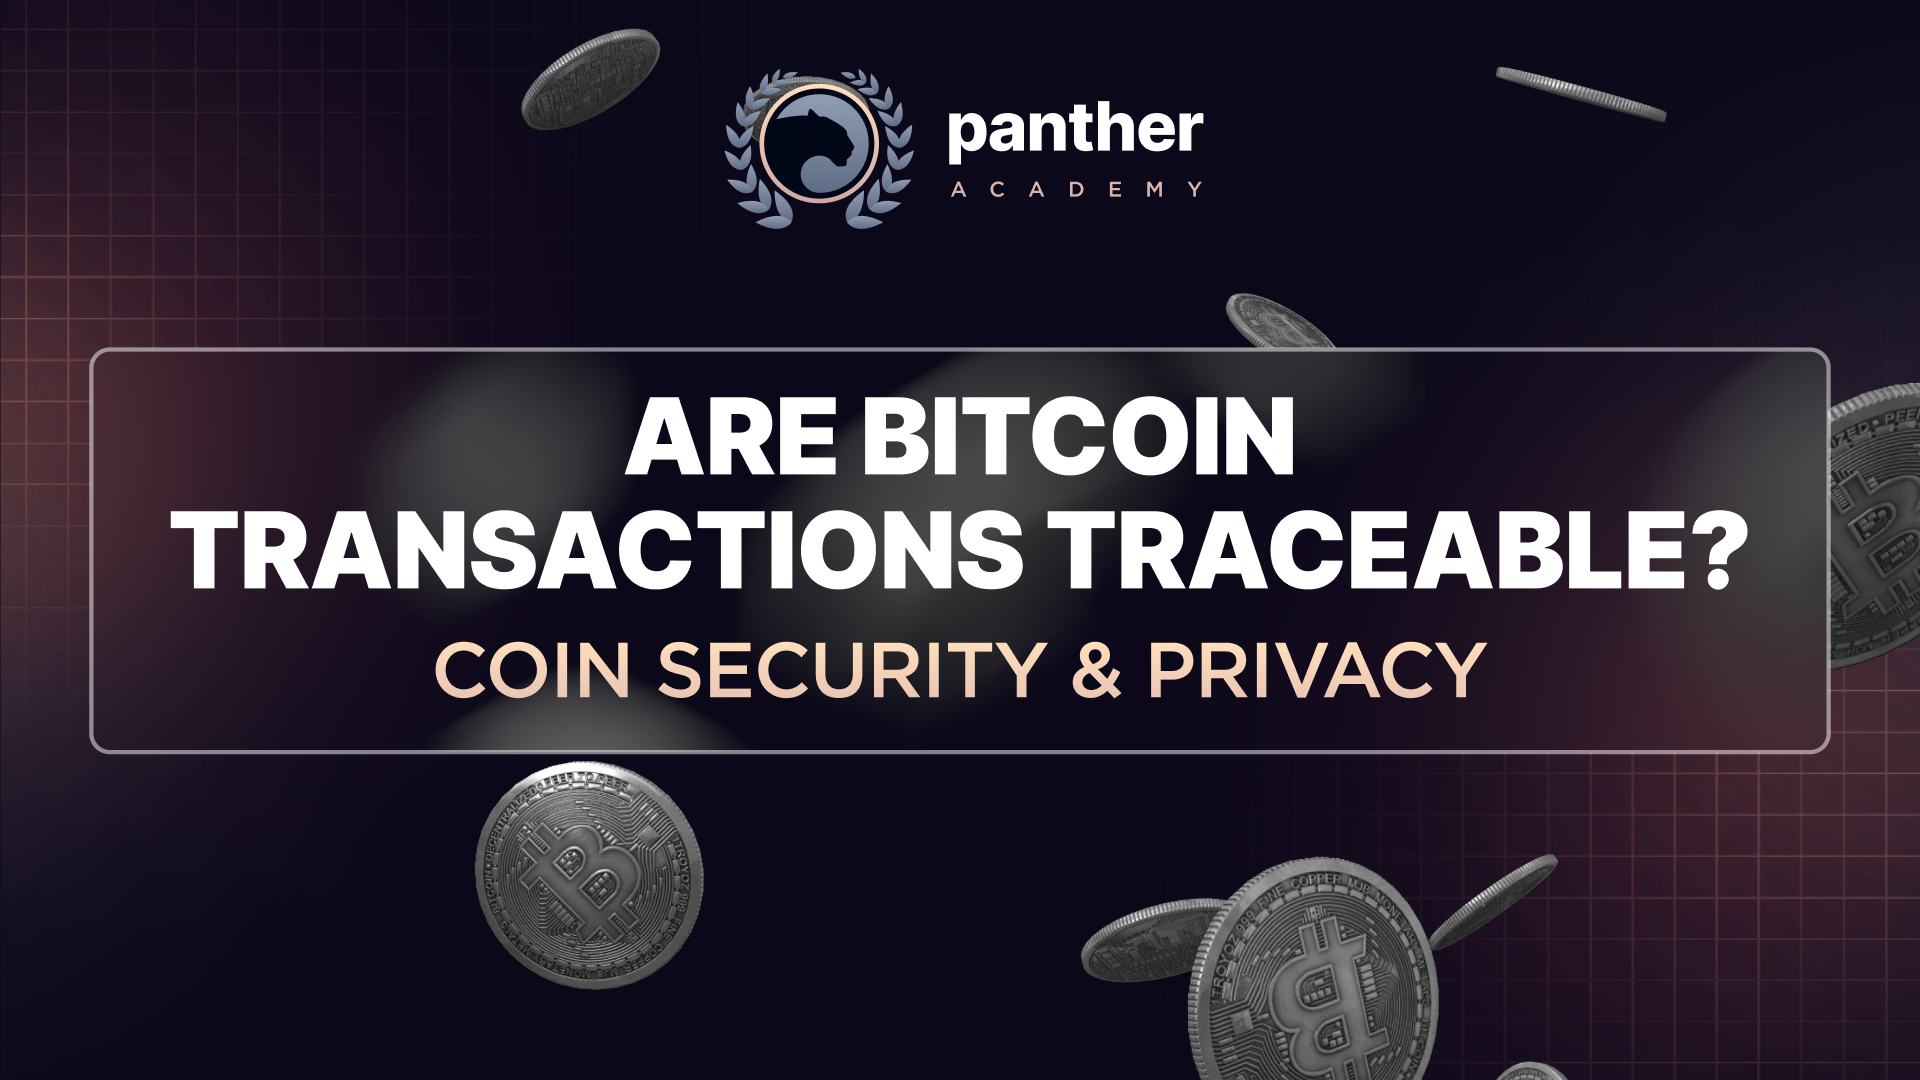 if bitcoin is traceable why do criminals use it